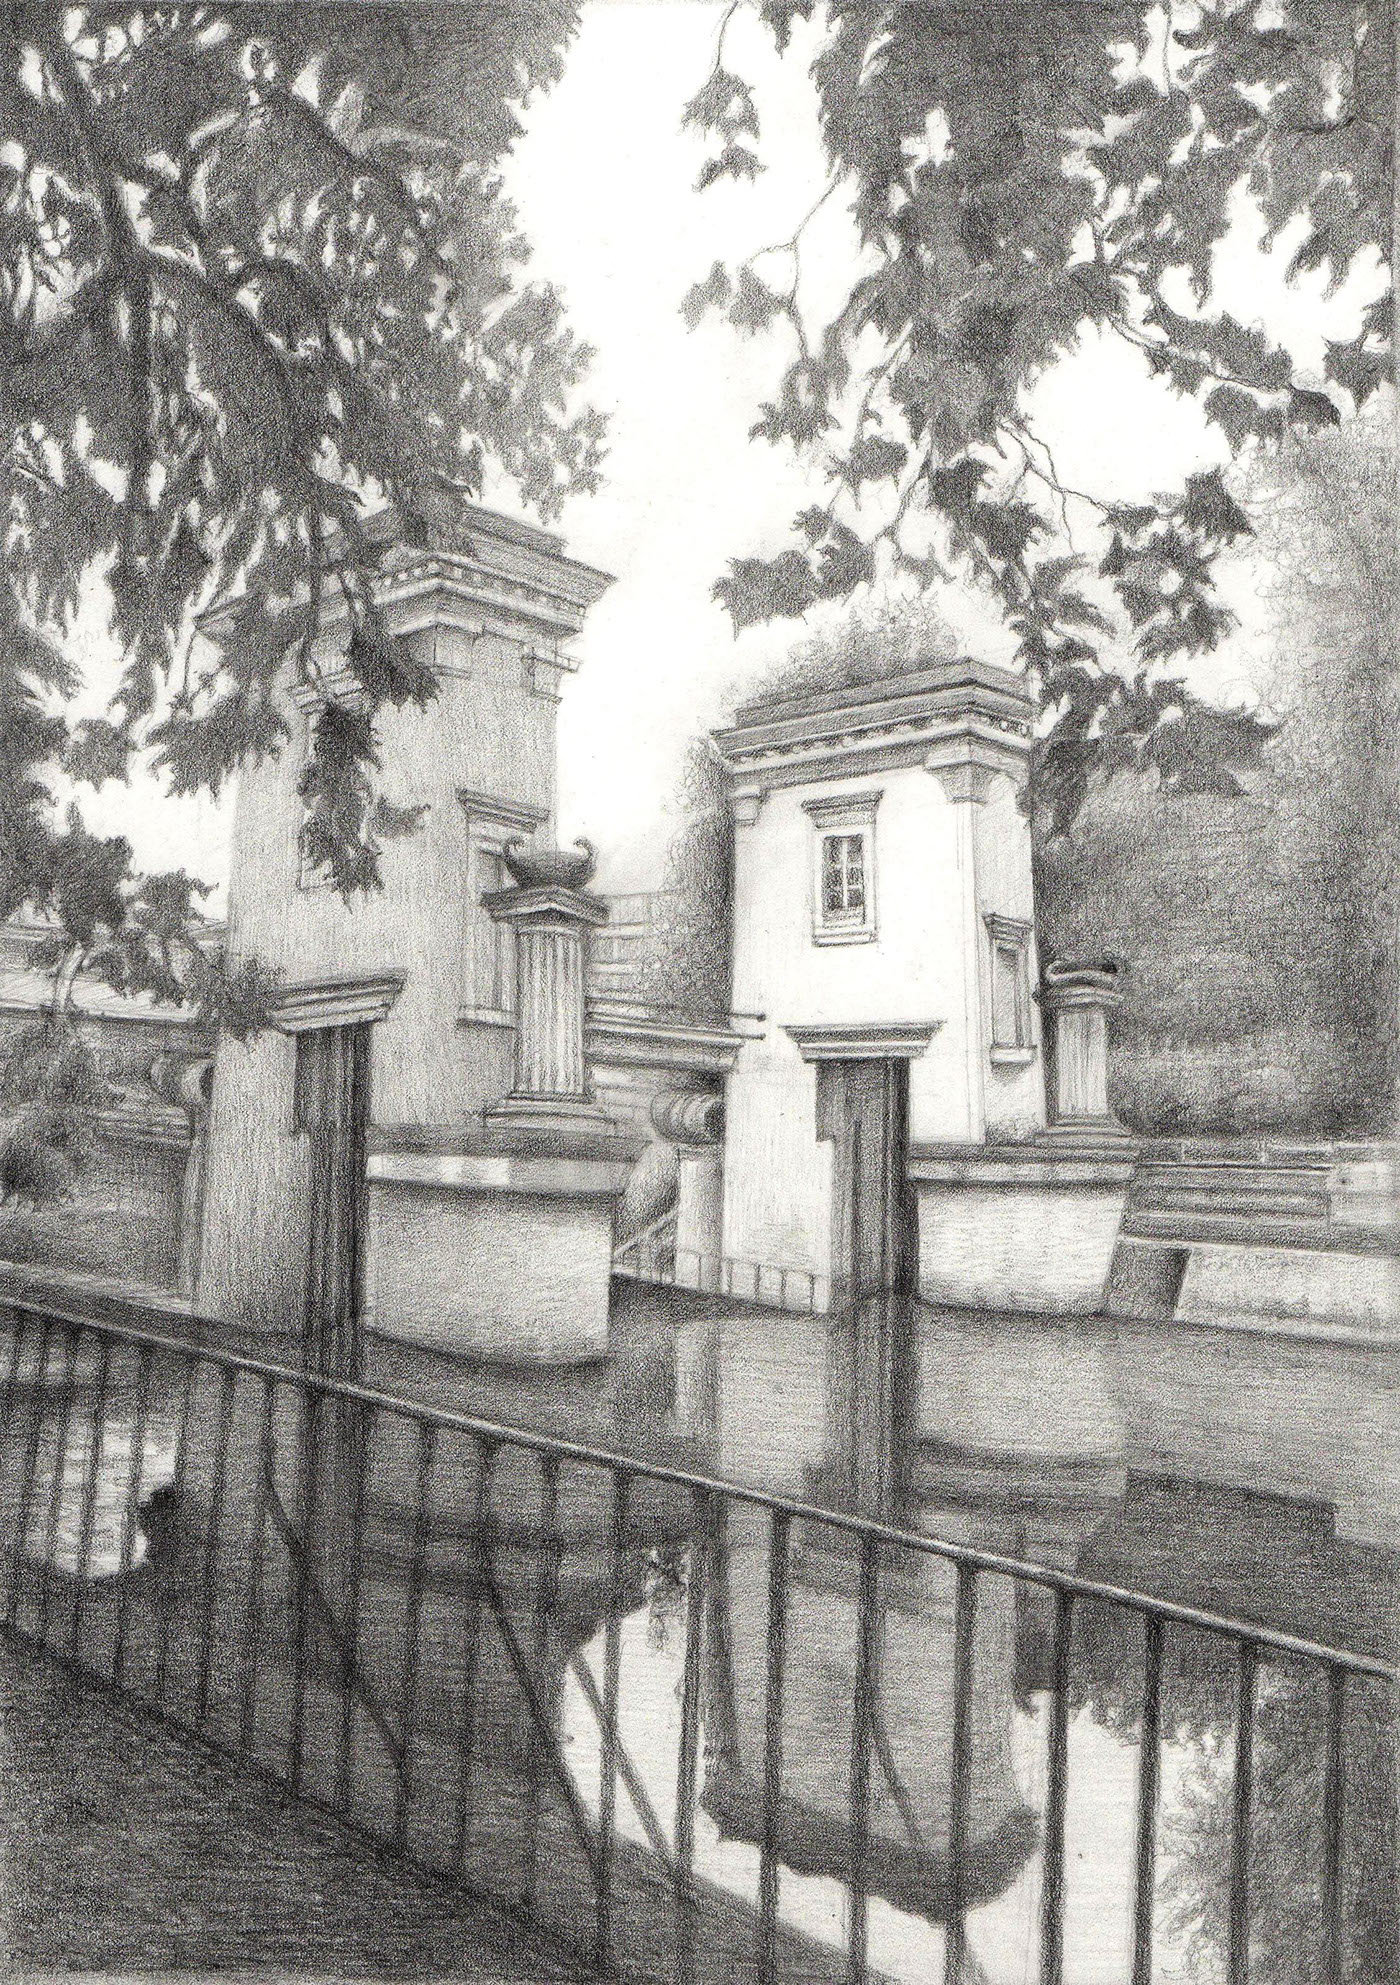 Pencil drawing graphite pencil handdrawn arhitecture water bariers ljubljana Urban quite places beautiful places islet of past